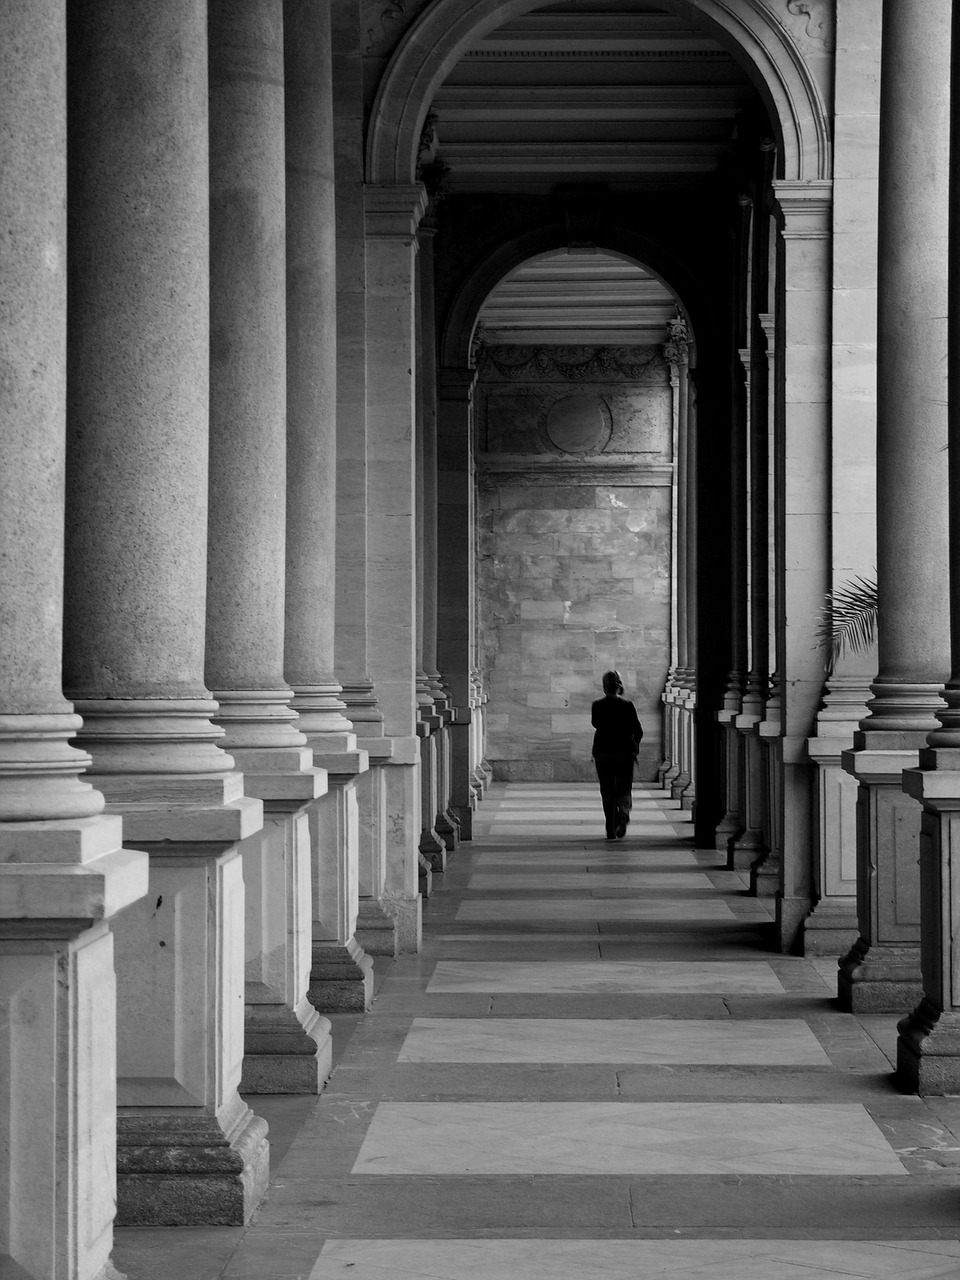 b w photography architecture the colonnade free photo